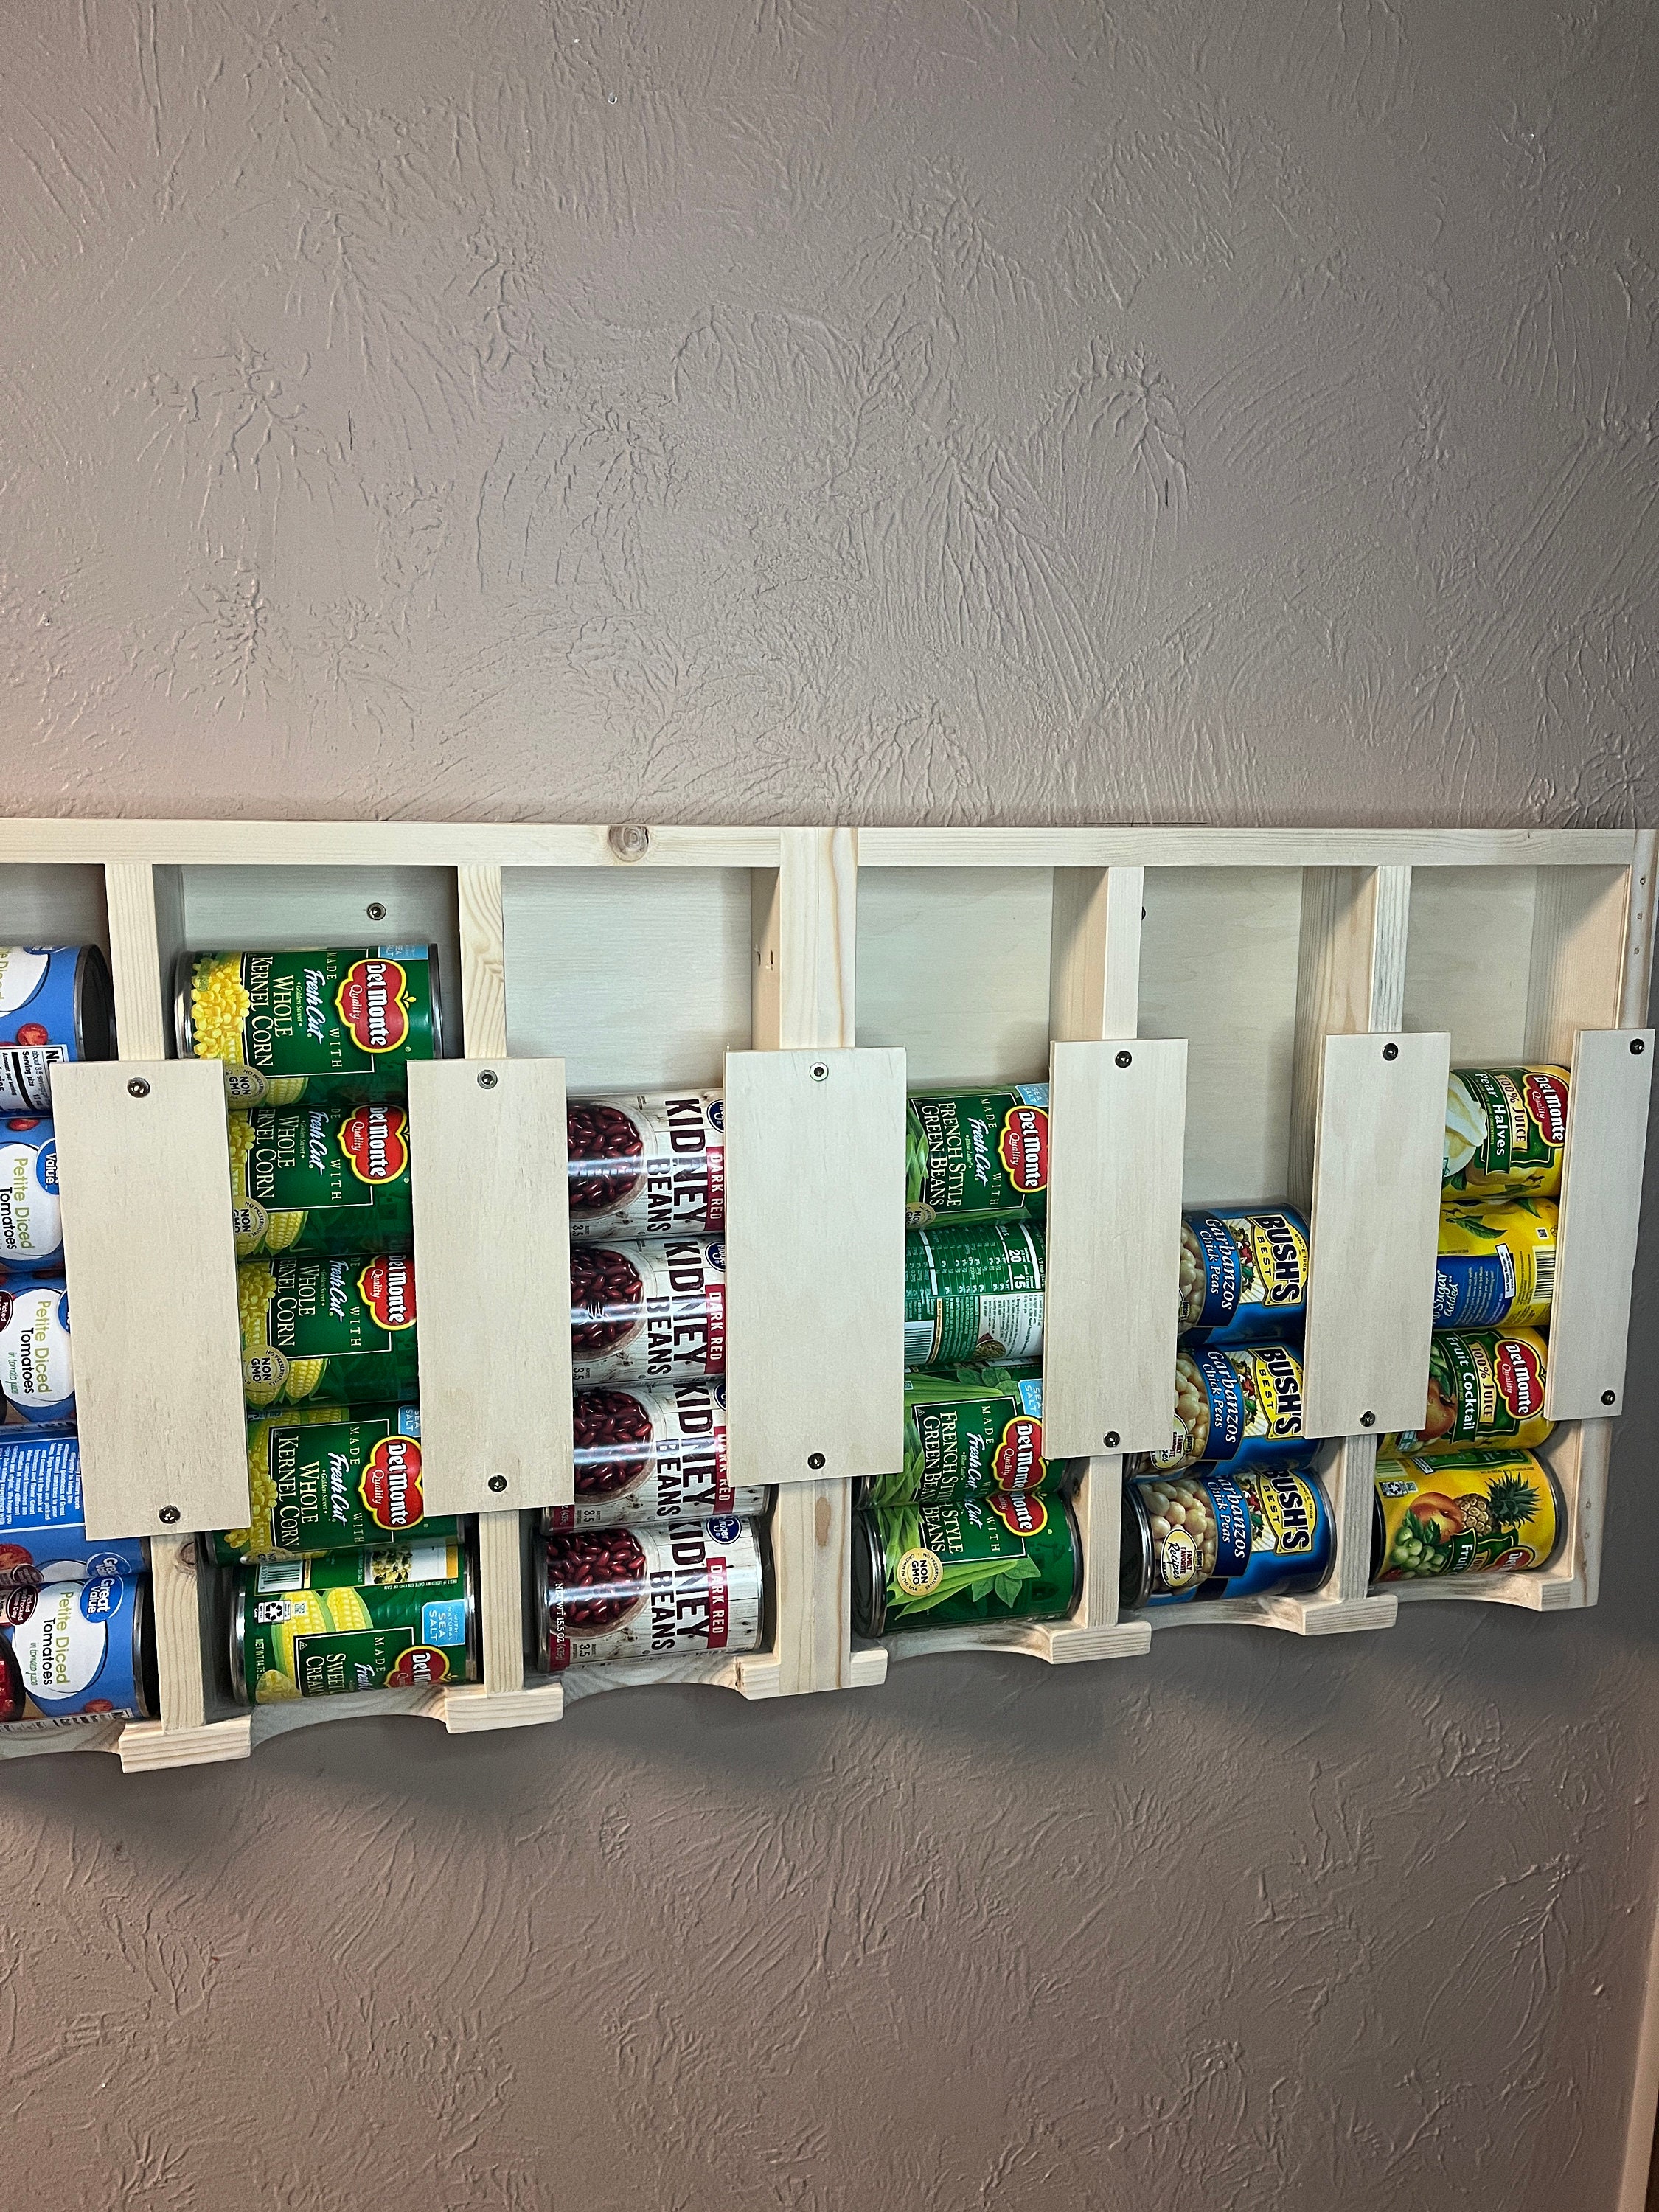 Wall Mounted Can Organizer